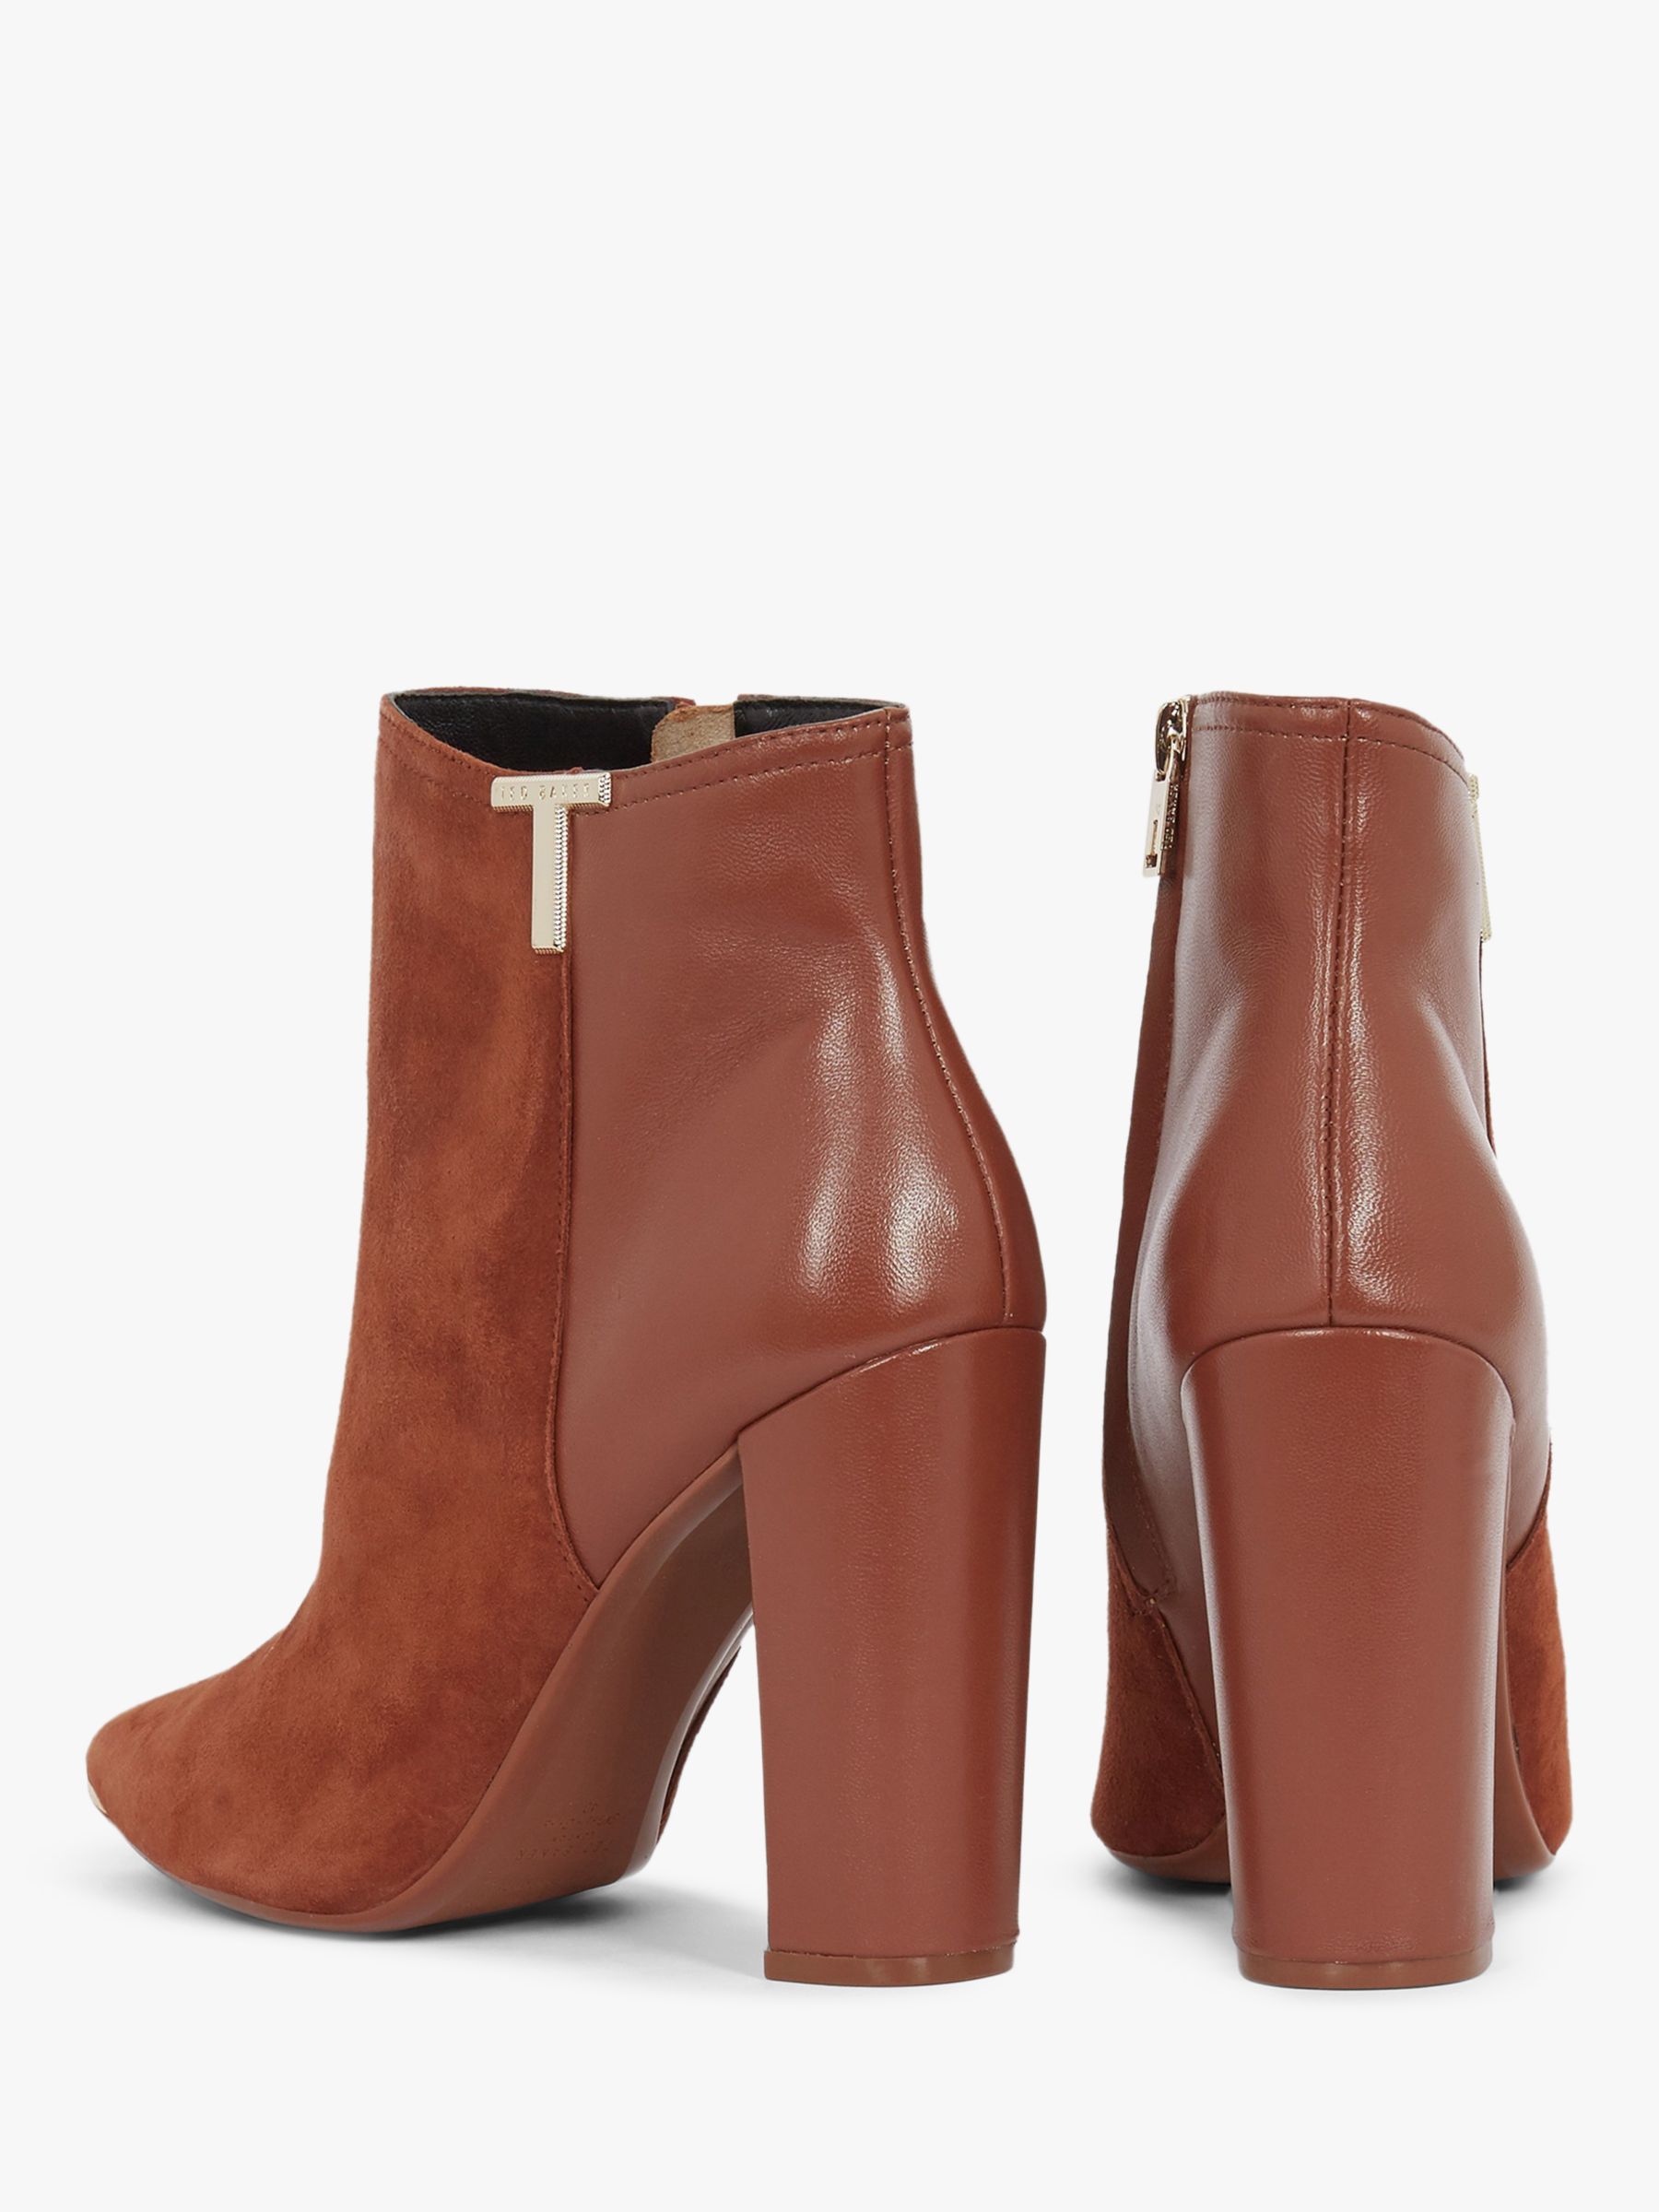 Ted Baker Inala Leather Suede Point Toe Ankle Boots, Tan at John Lewis ...